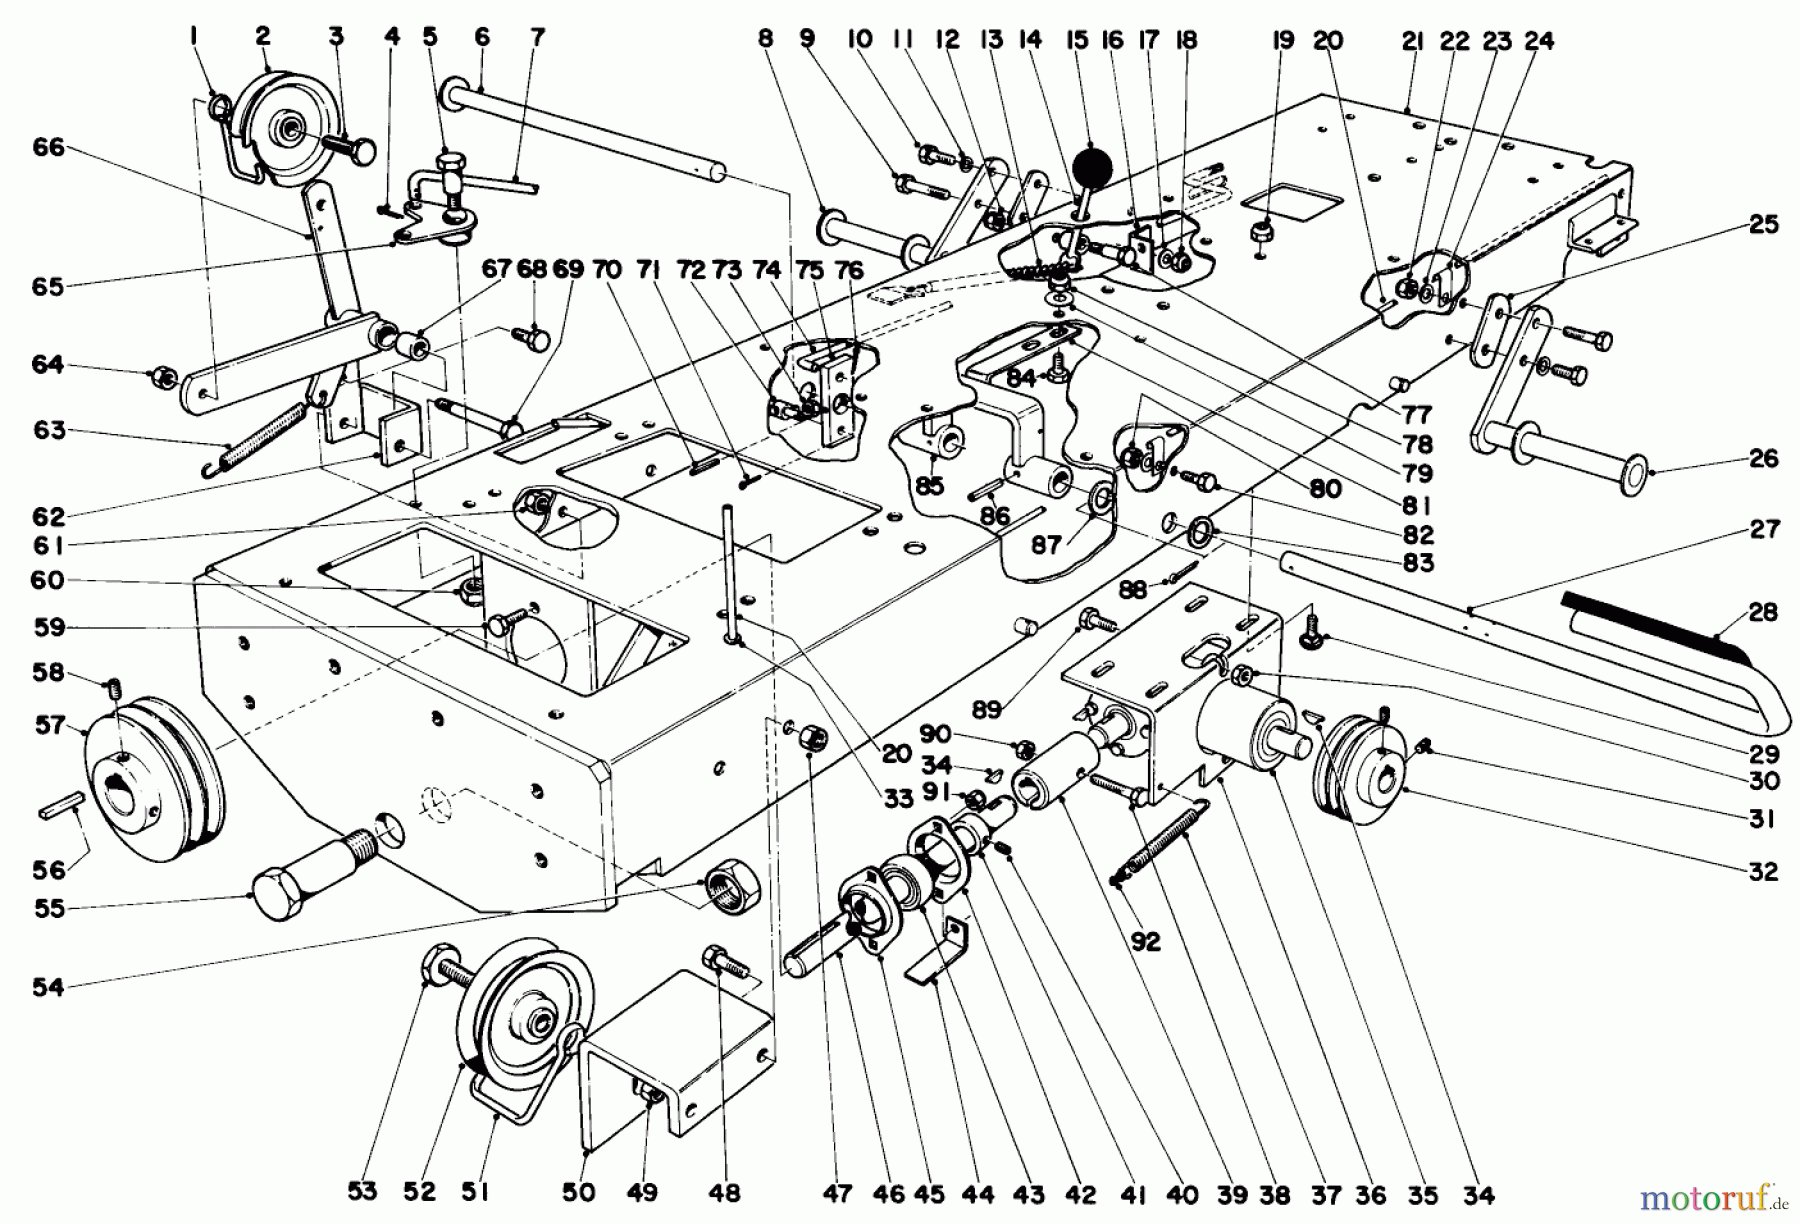  Toro Neu Mowers, Lawn & Garden Tractor Seite 1 55302 (950) - Toro 950 Suburban Lawn Tractor, 1969 (9000001-9999999) CHASSIS ASSEMBLY